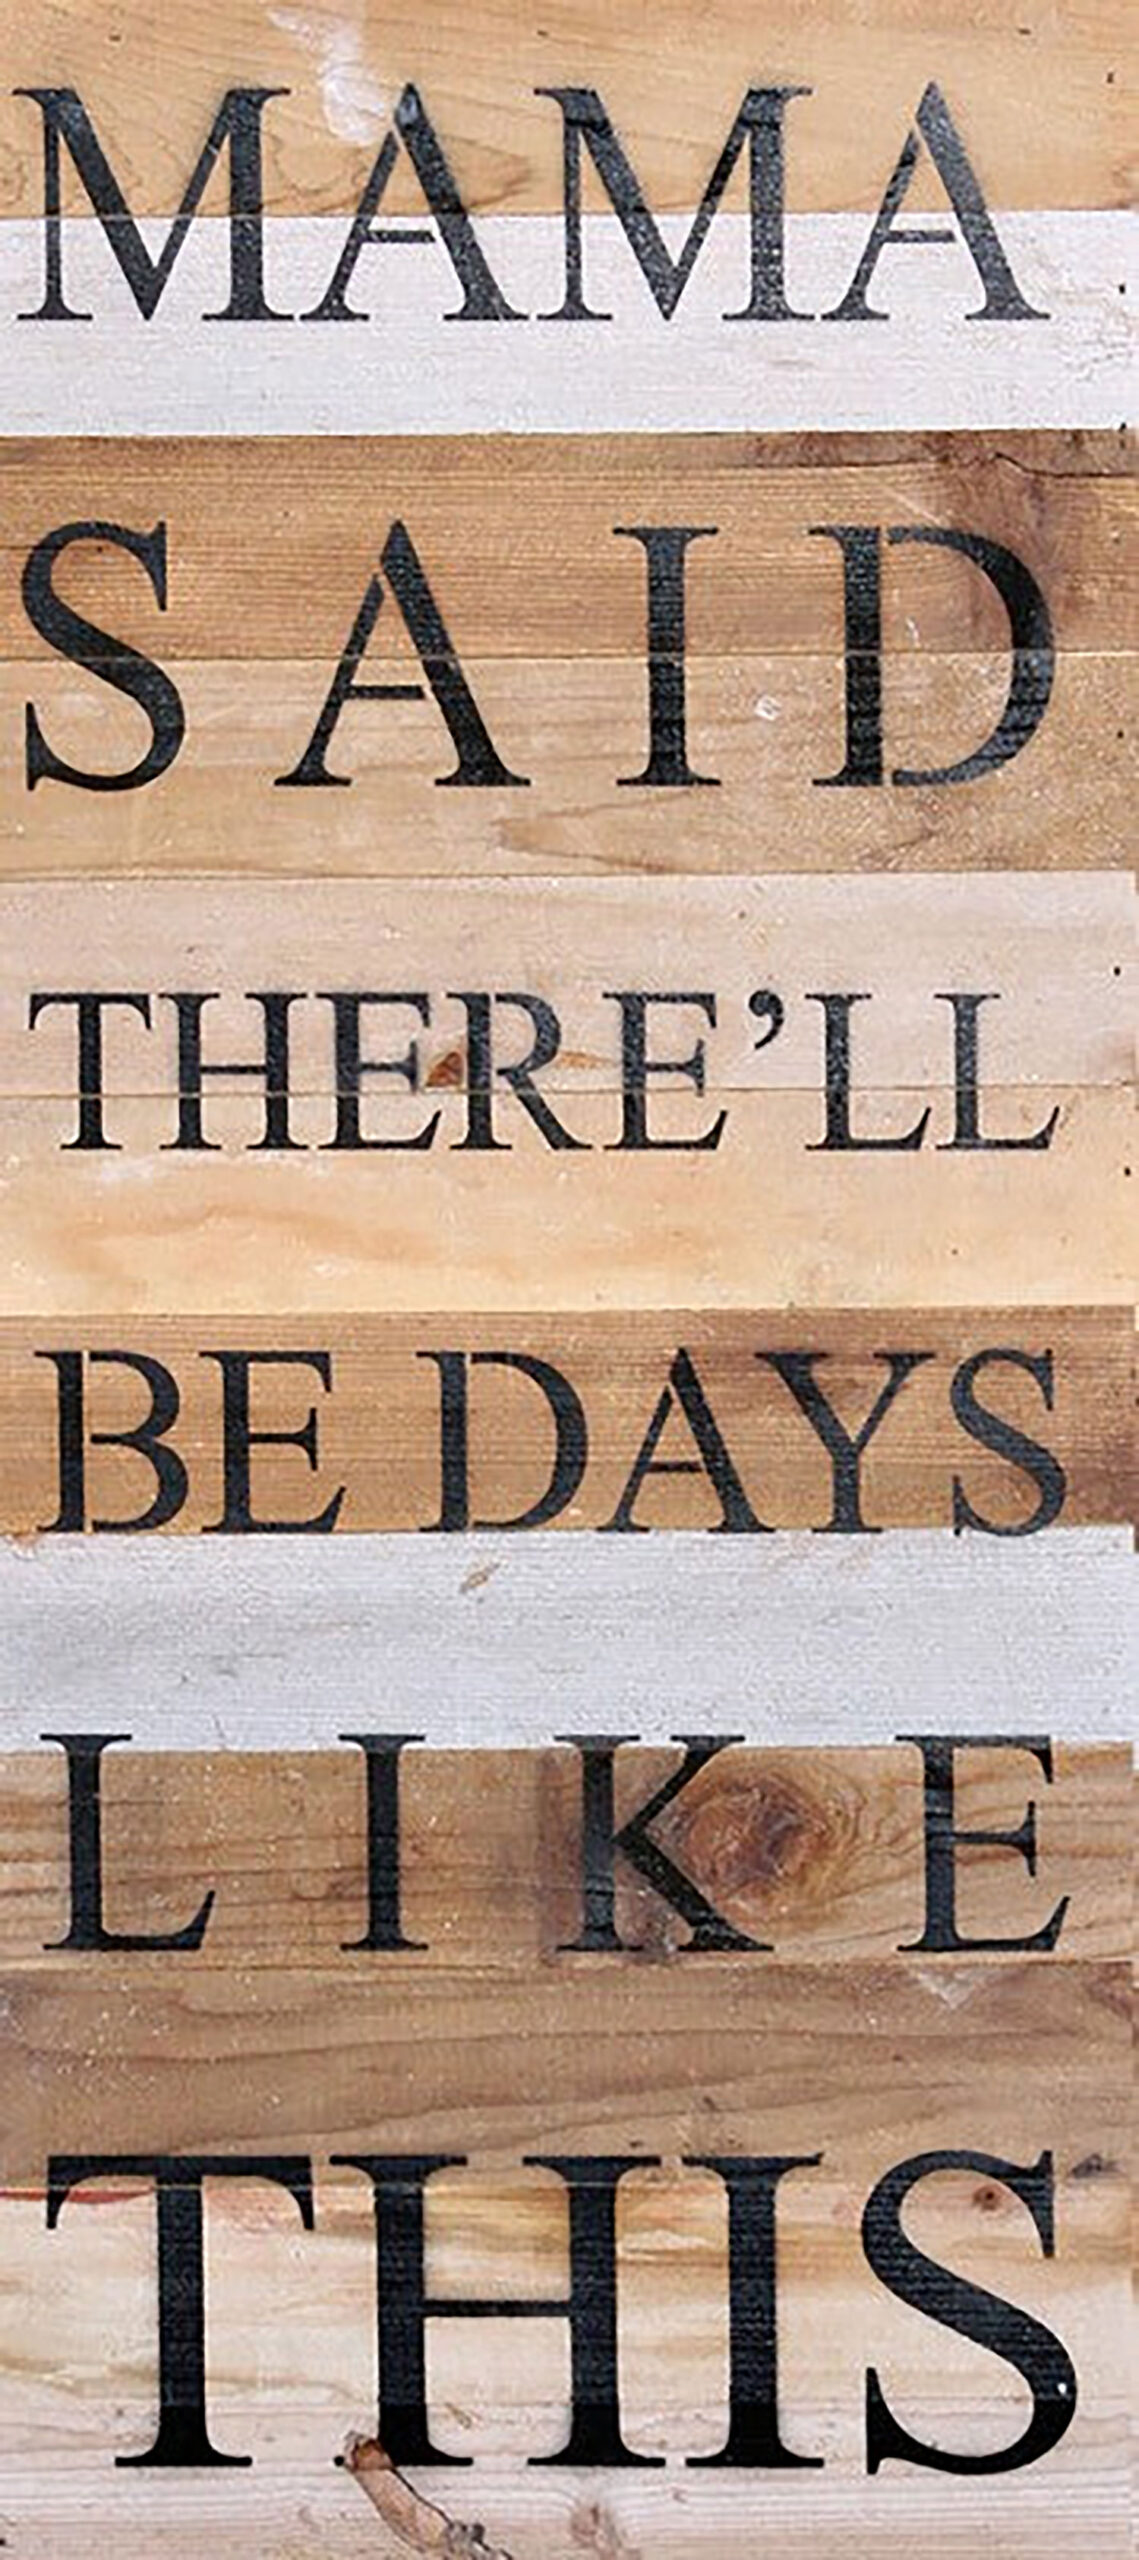 Mama said there'll be days like this. / 12"x24" Reclaimed Wood Sign